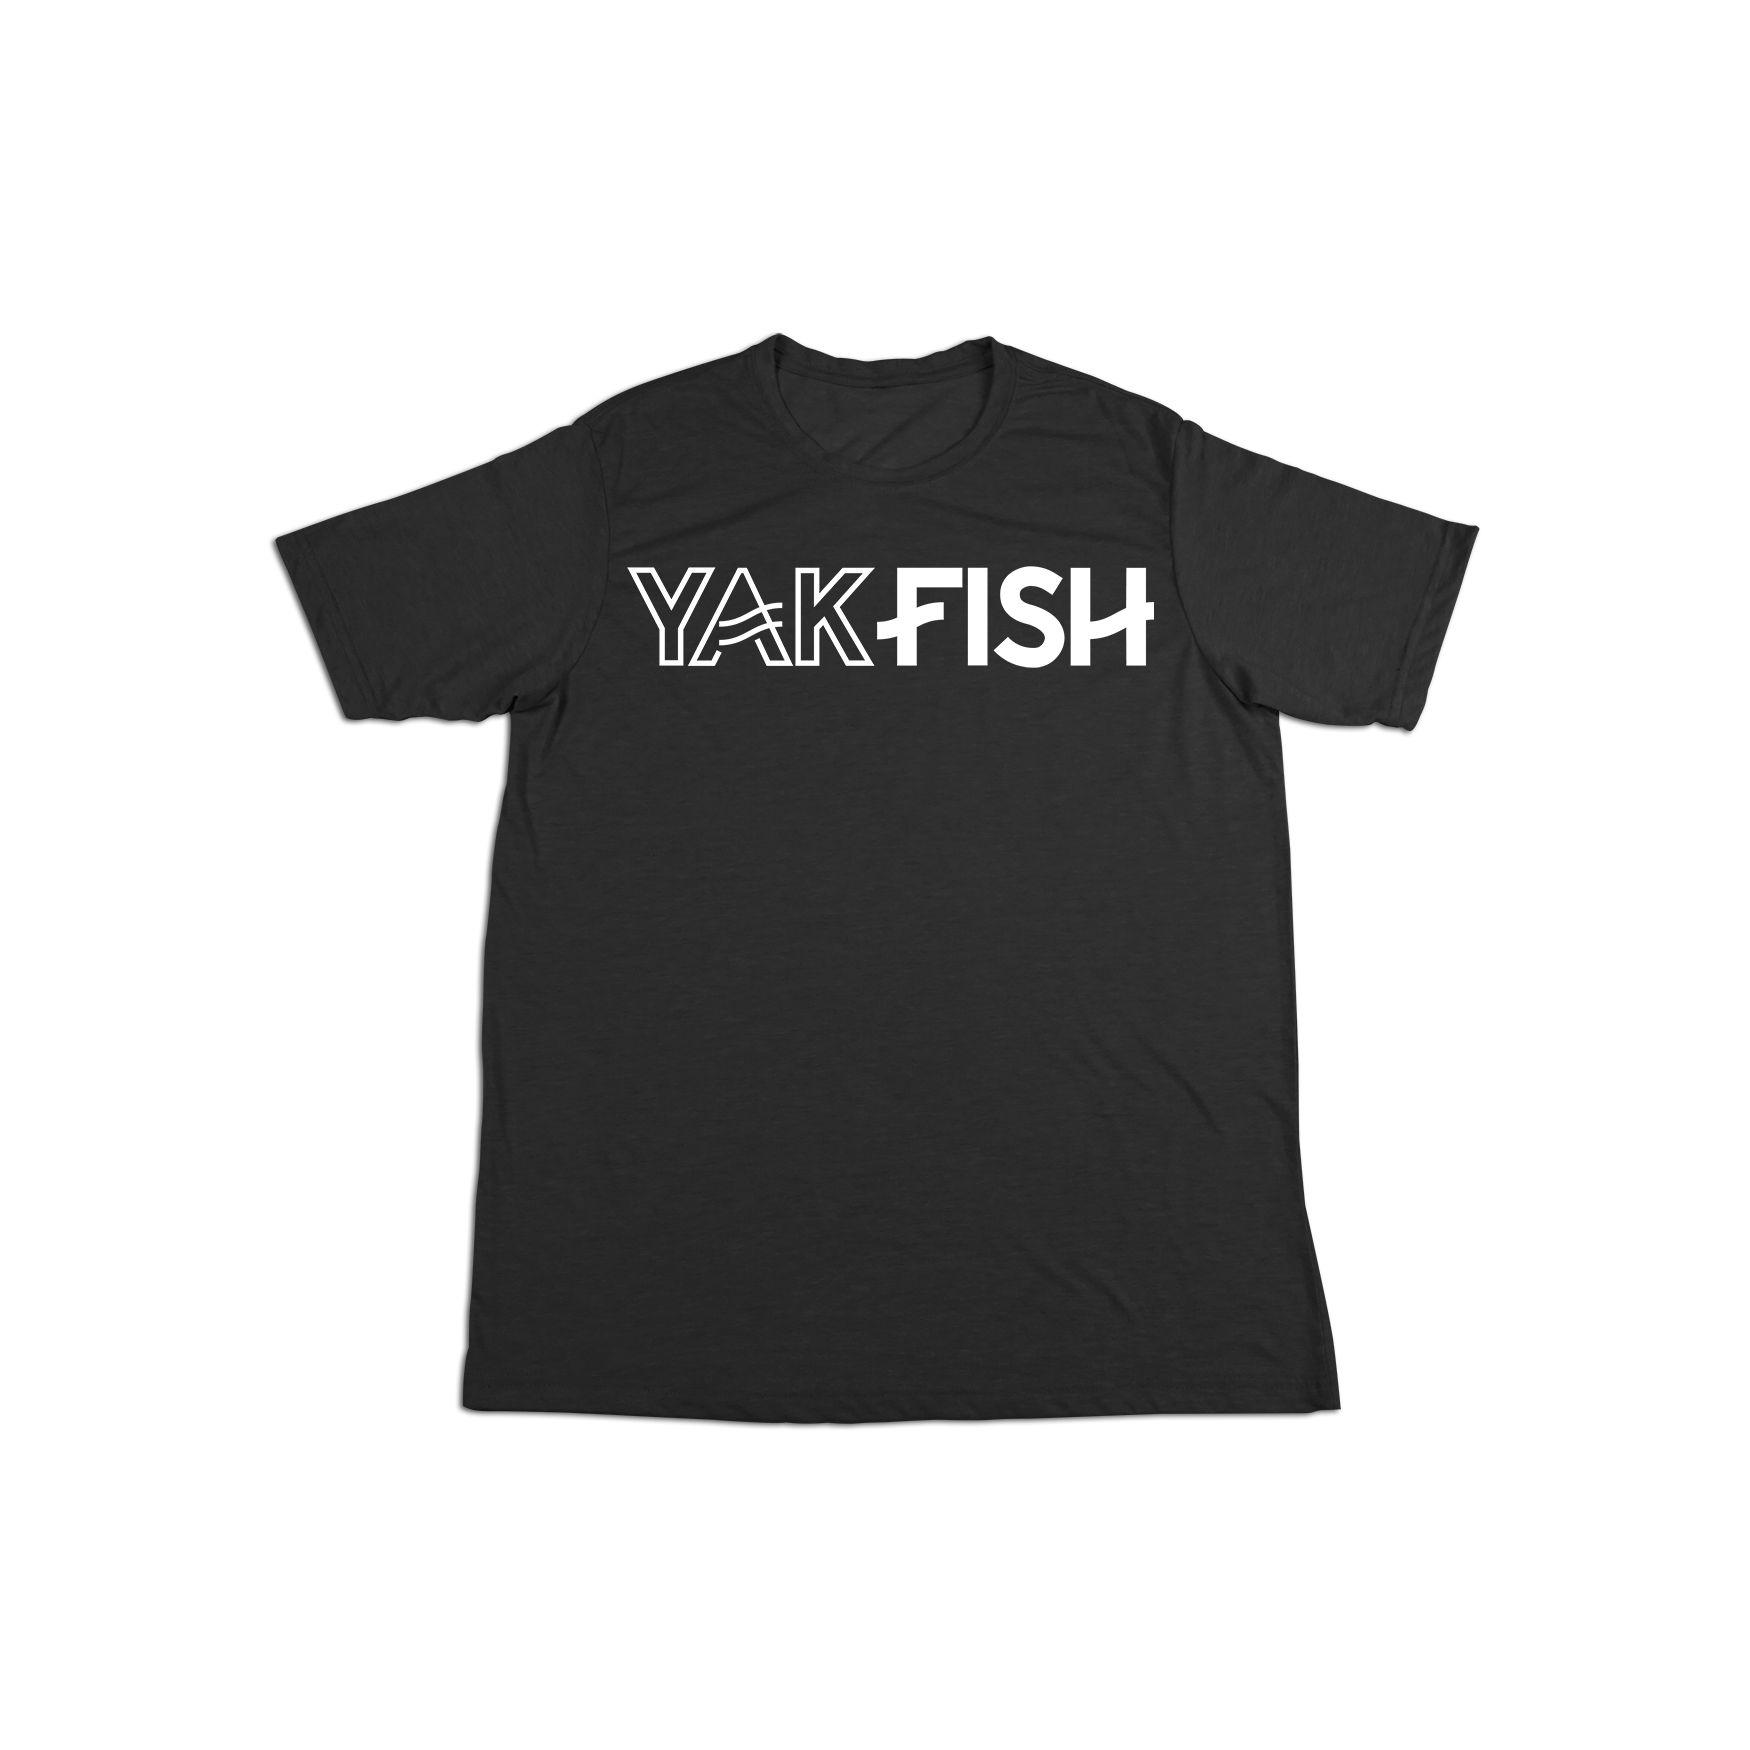 #YAKFISH CLASSIC YOUTH Soft Shirt - Hat Mount for GoPro